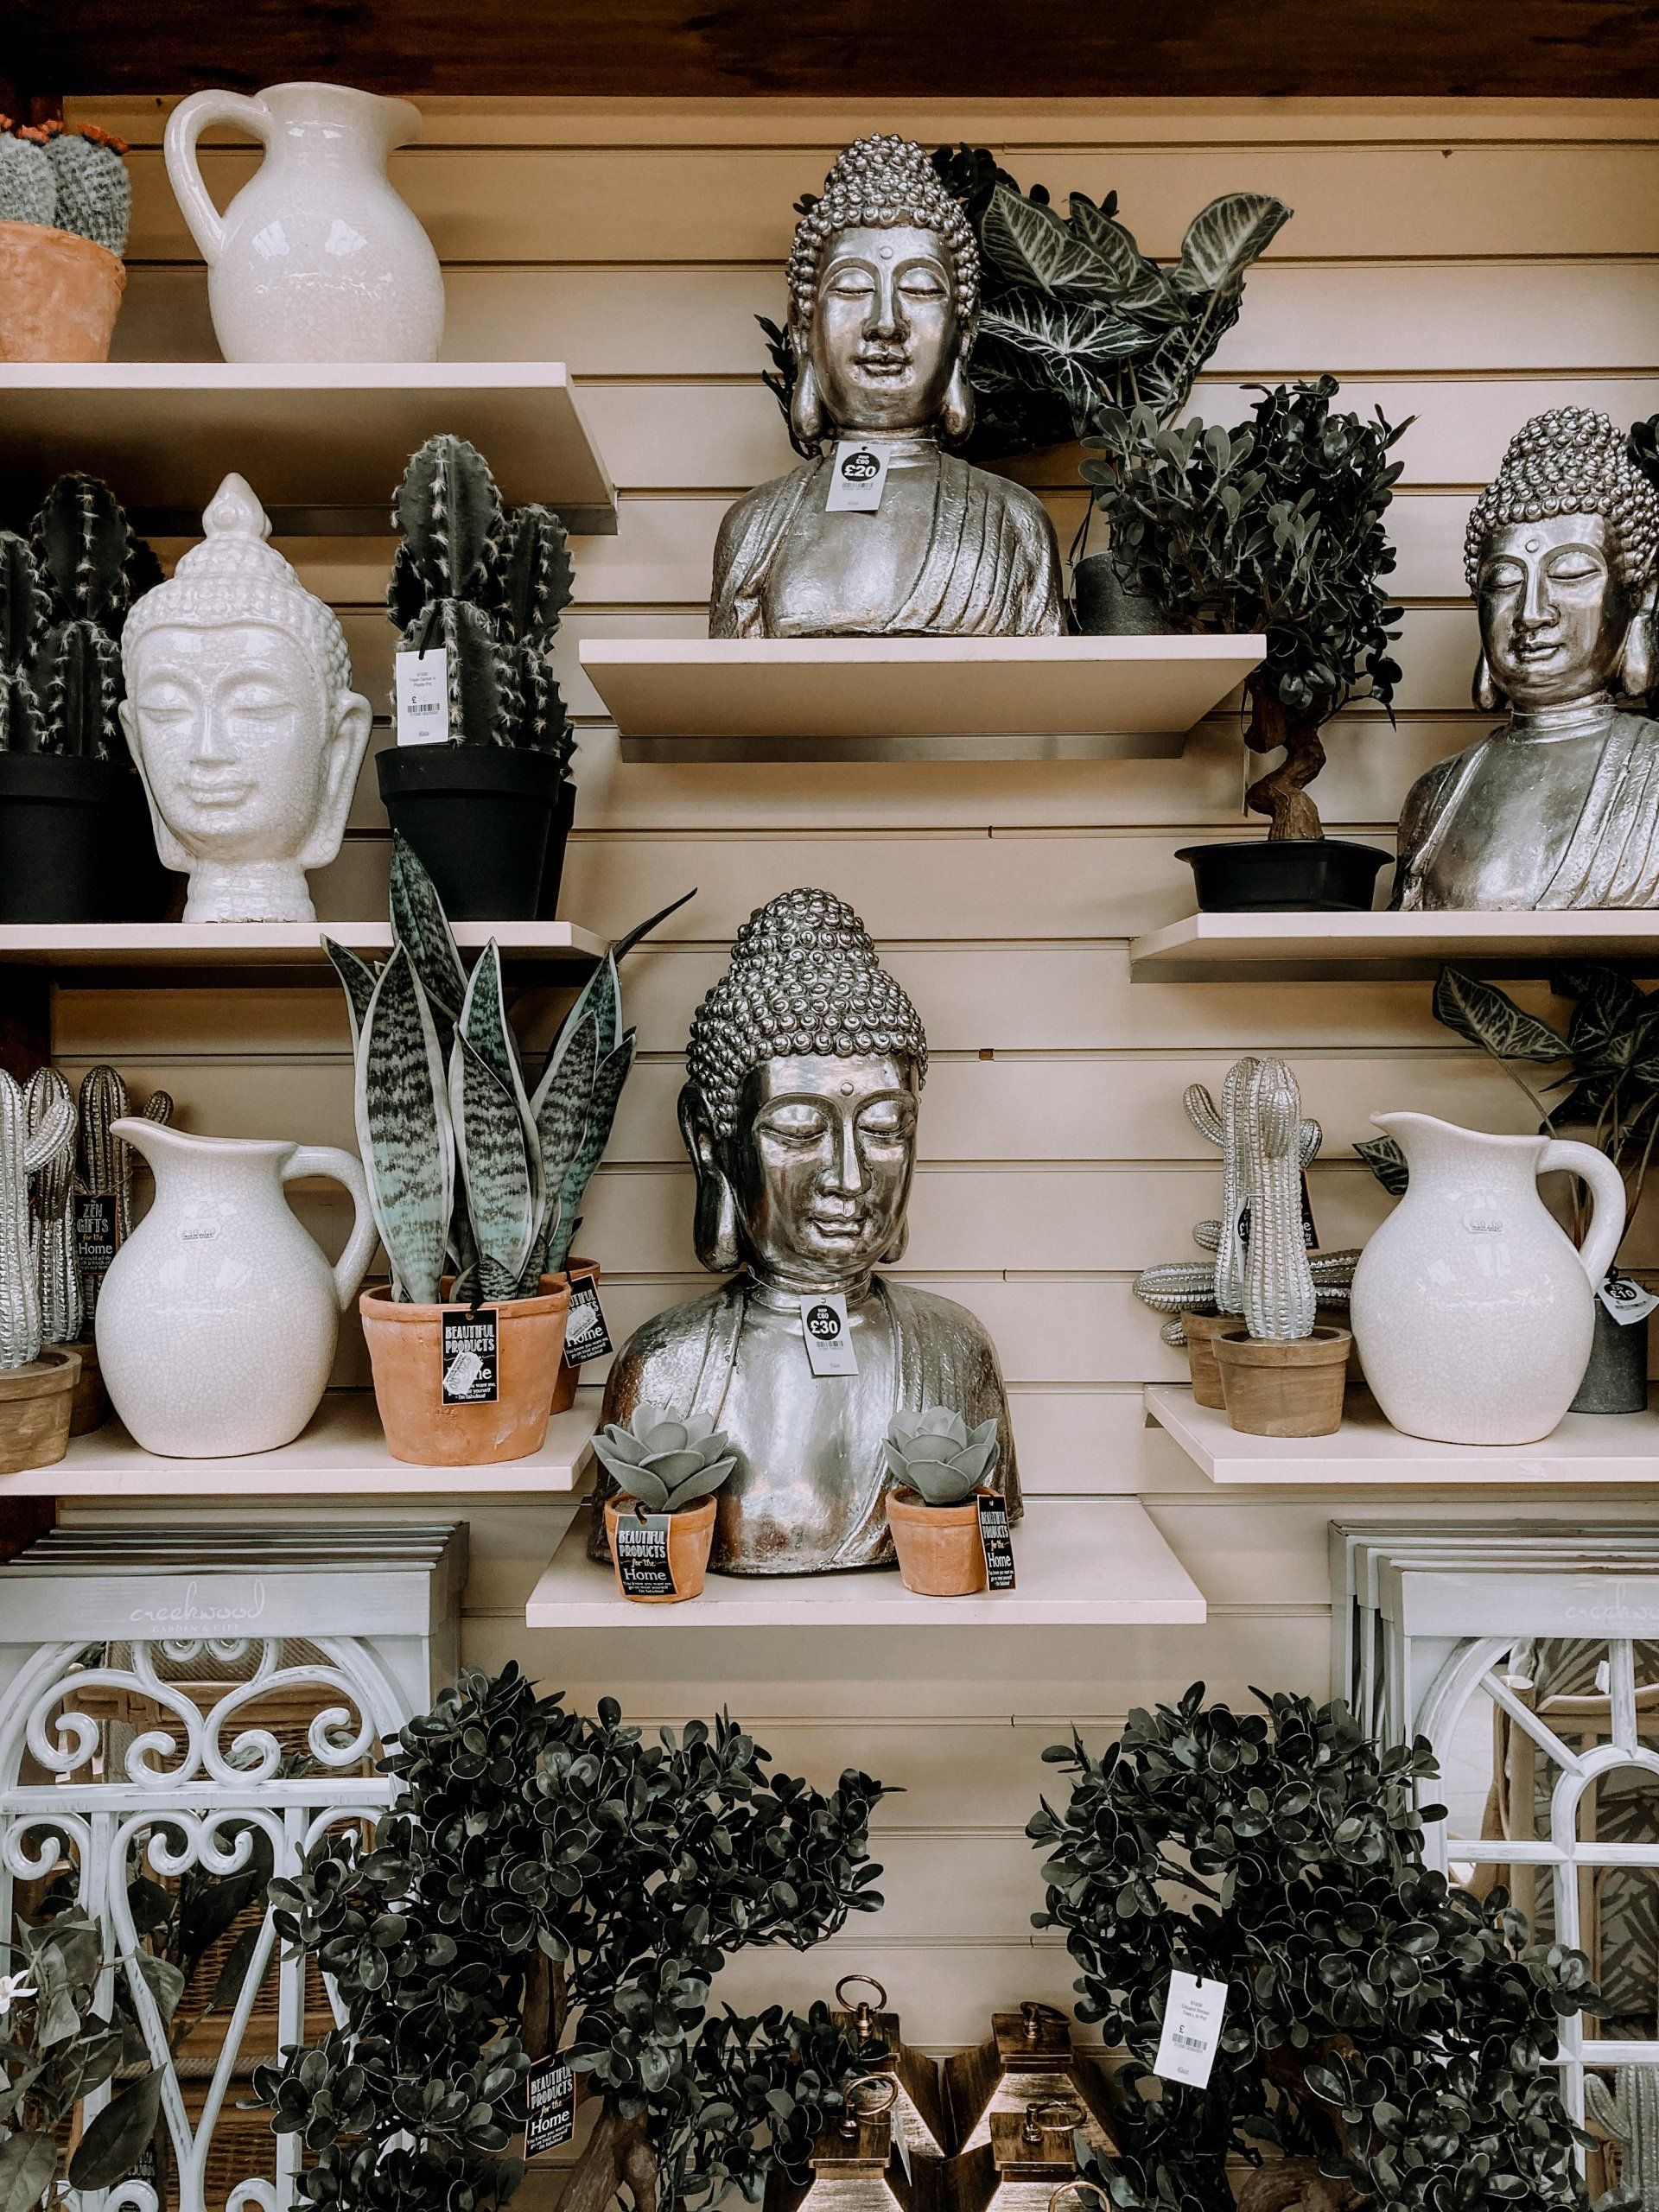 Home interior display for a retailer, with shelves of plants and ornaments